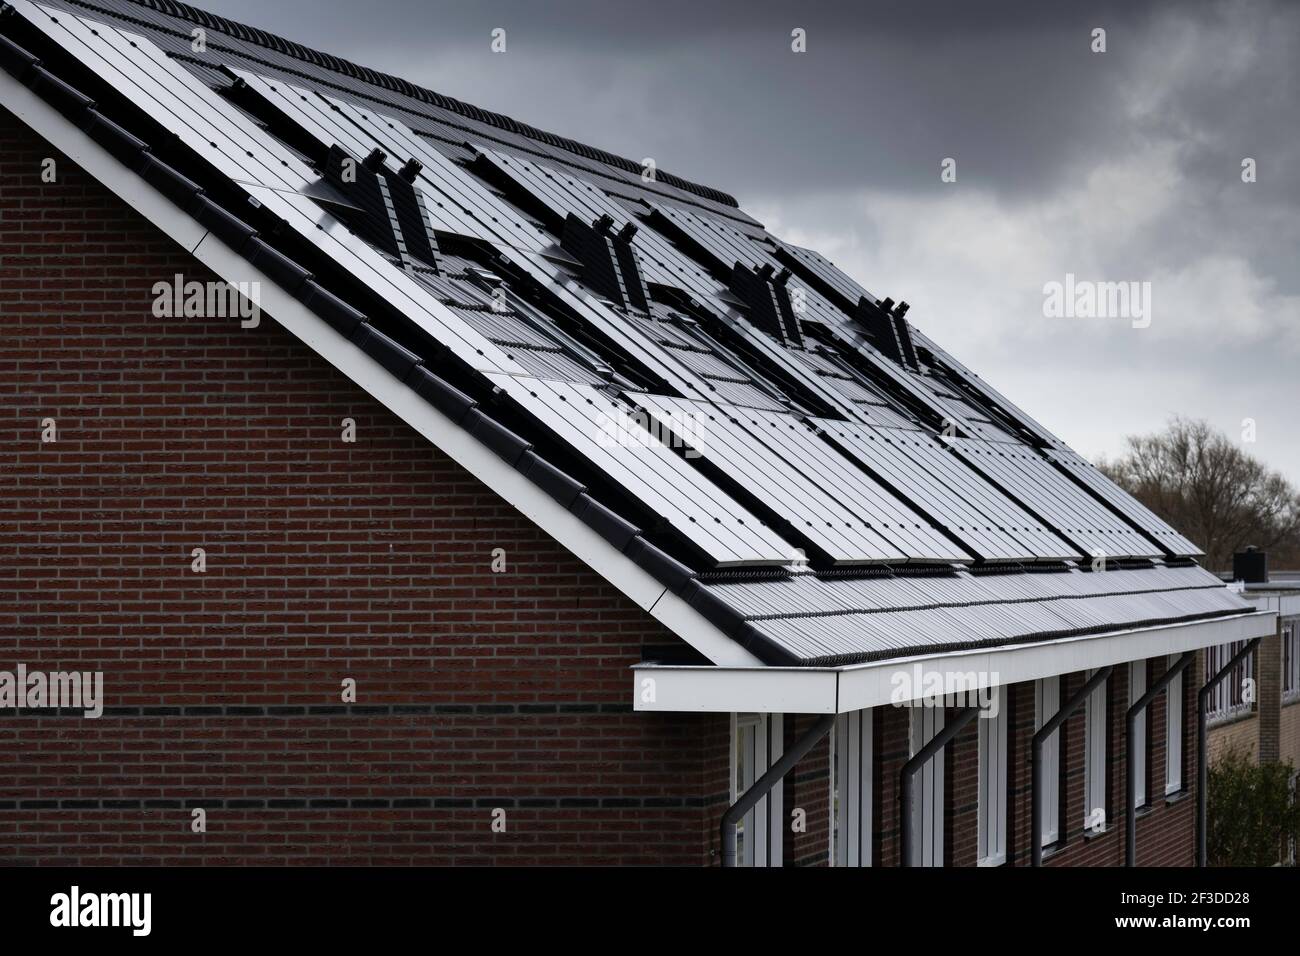 Solar panels mounted on the roof of modern new-build homes in Lemmer, Friesland, The Netherlands on a heavily overcast day. Is there enough sunlight? Stock Photo